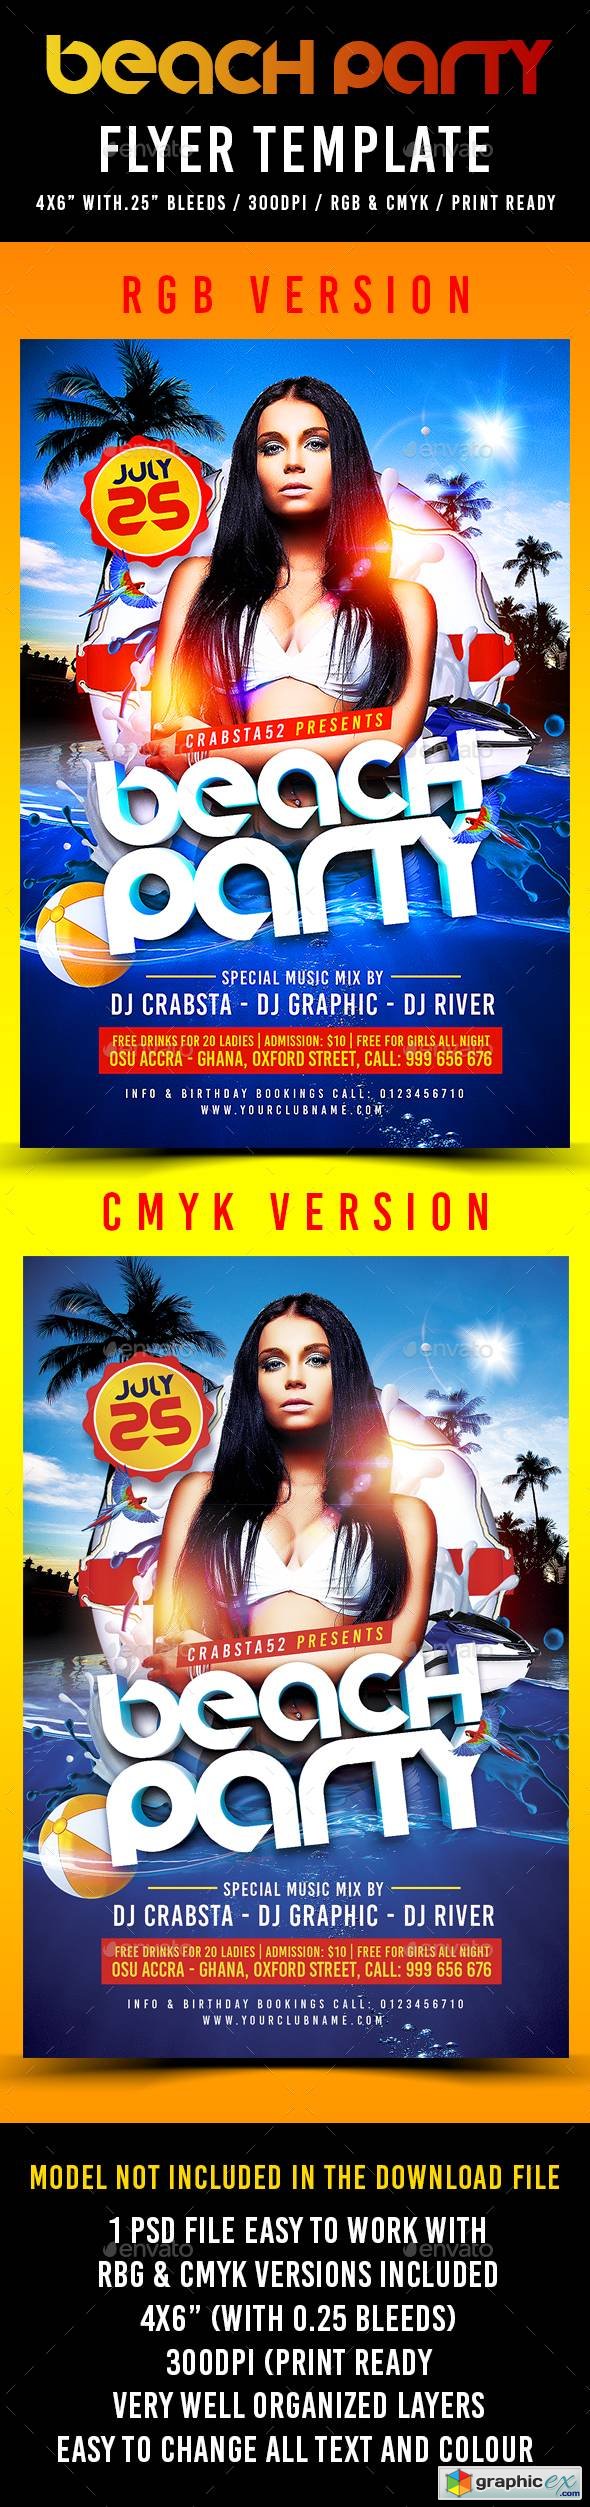 Beach Party Flyer Template 15476647